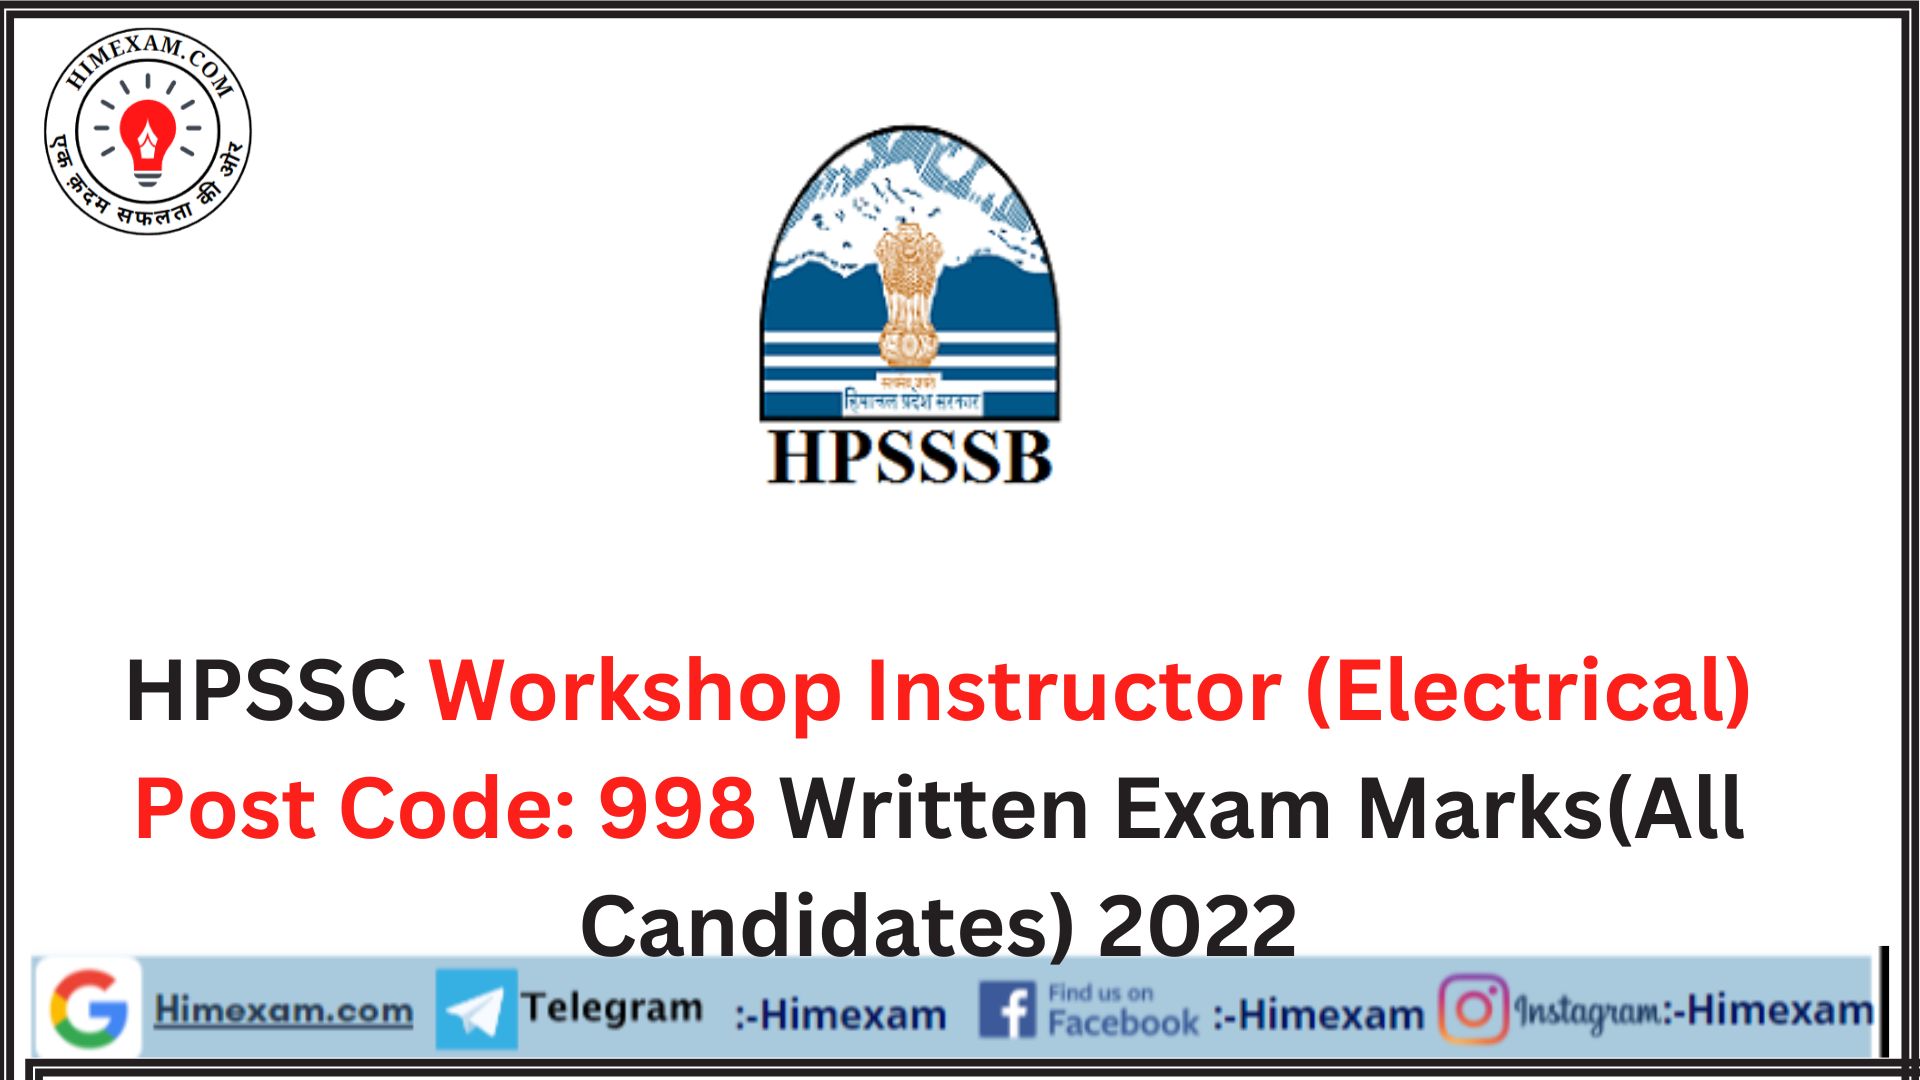 HPSSC Workshop Instructor (Electrical) Post Code: 998 Written Exam Marks(All Candidates) 2022